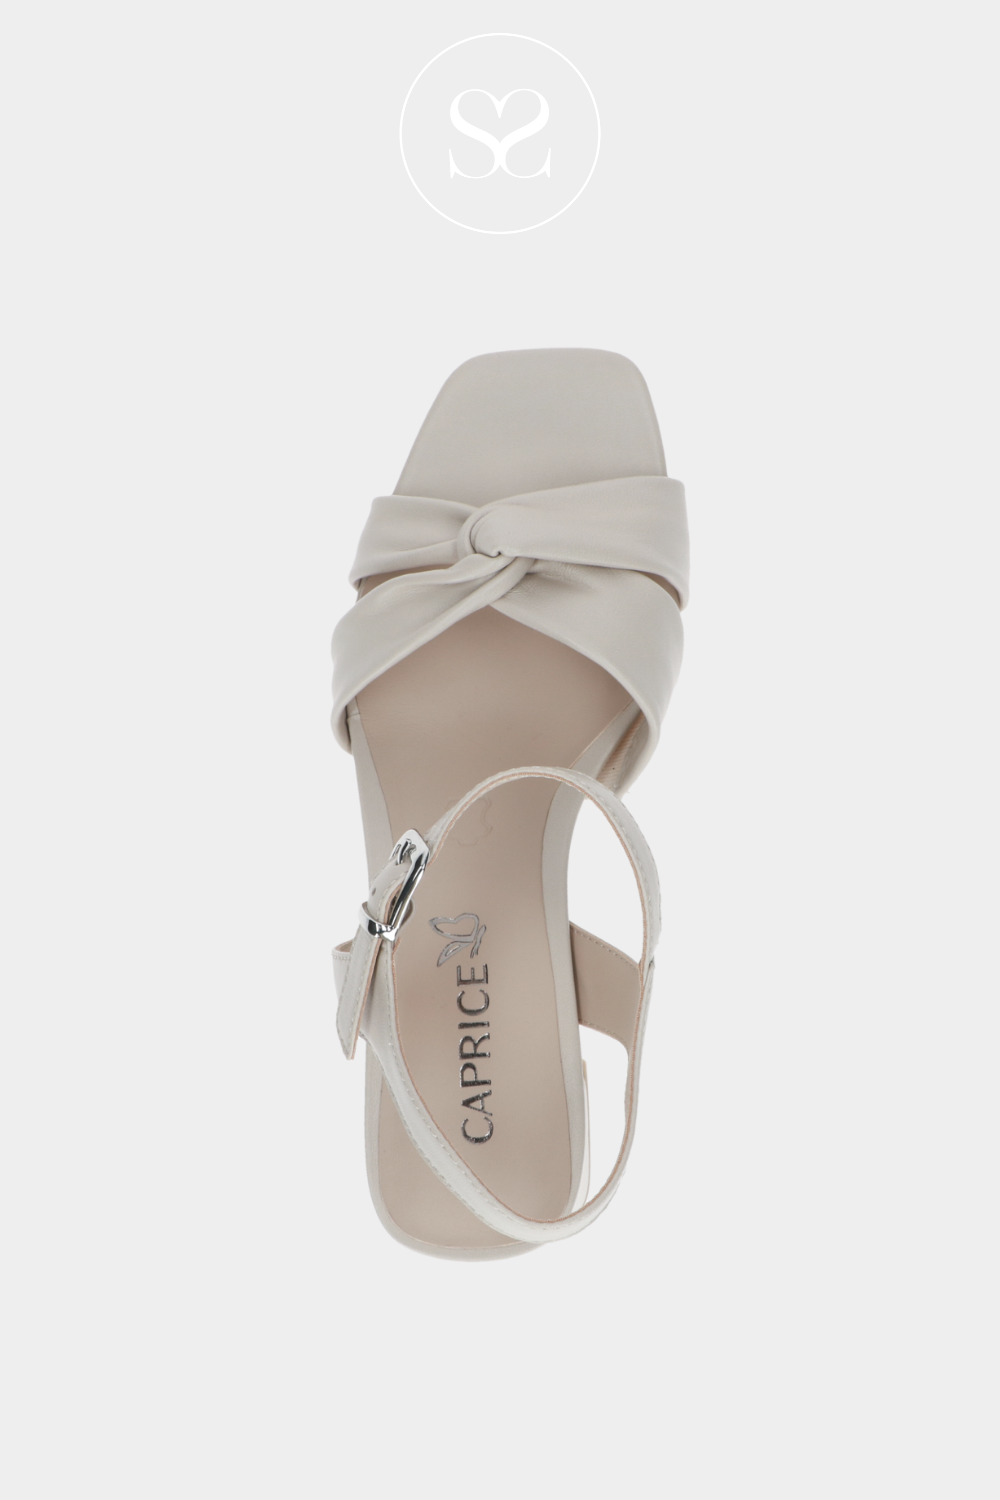 CAPRICE 9-28316-42 IVORY OFF WHITE BLOCK HEELED SANDALS WITH KNOTTED BOW ACROSS THE TOE STRAP AND AN ADJUSTABLE ANKLE STRAP